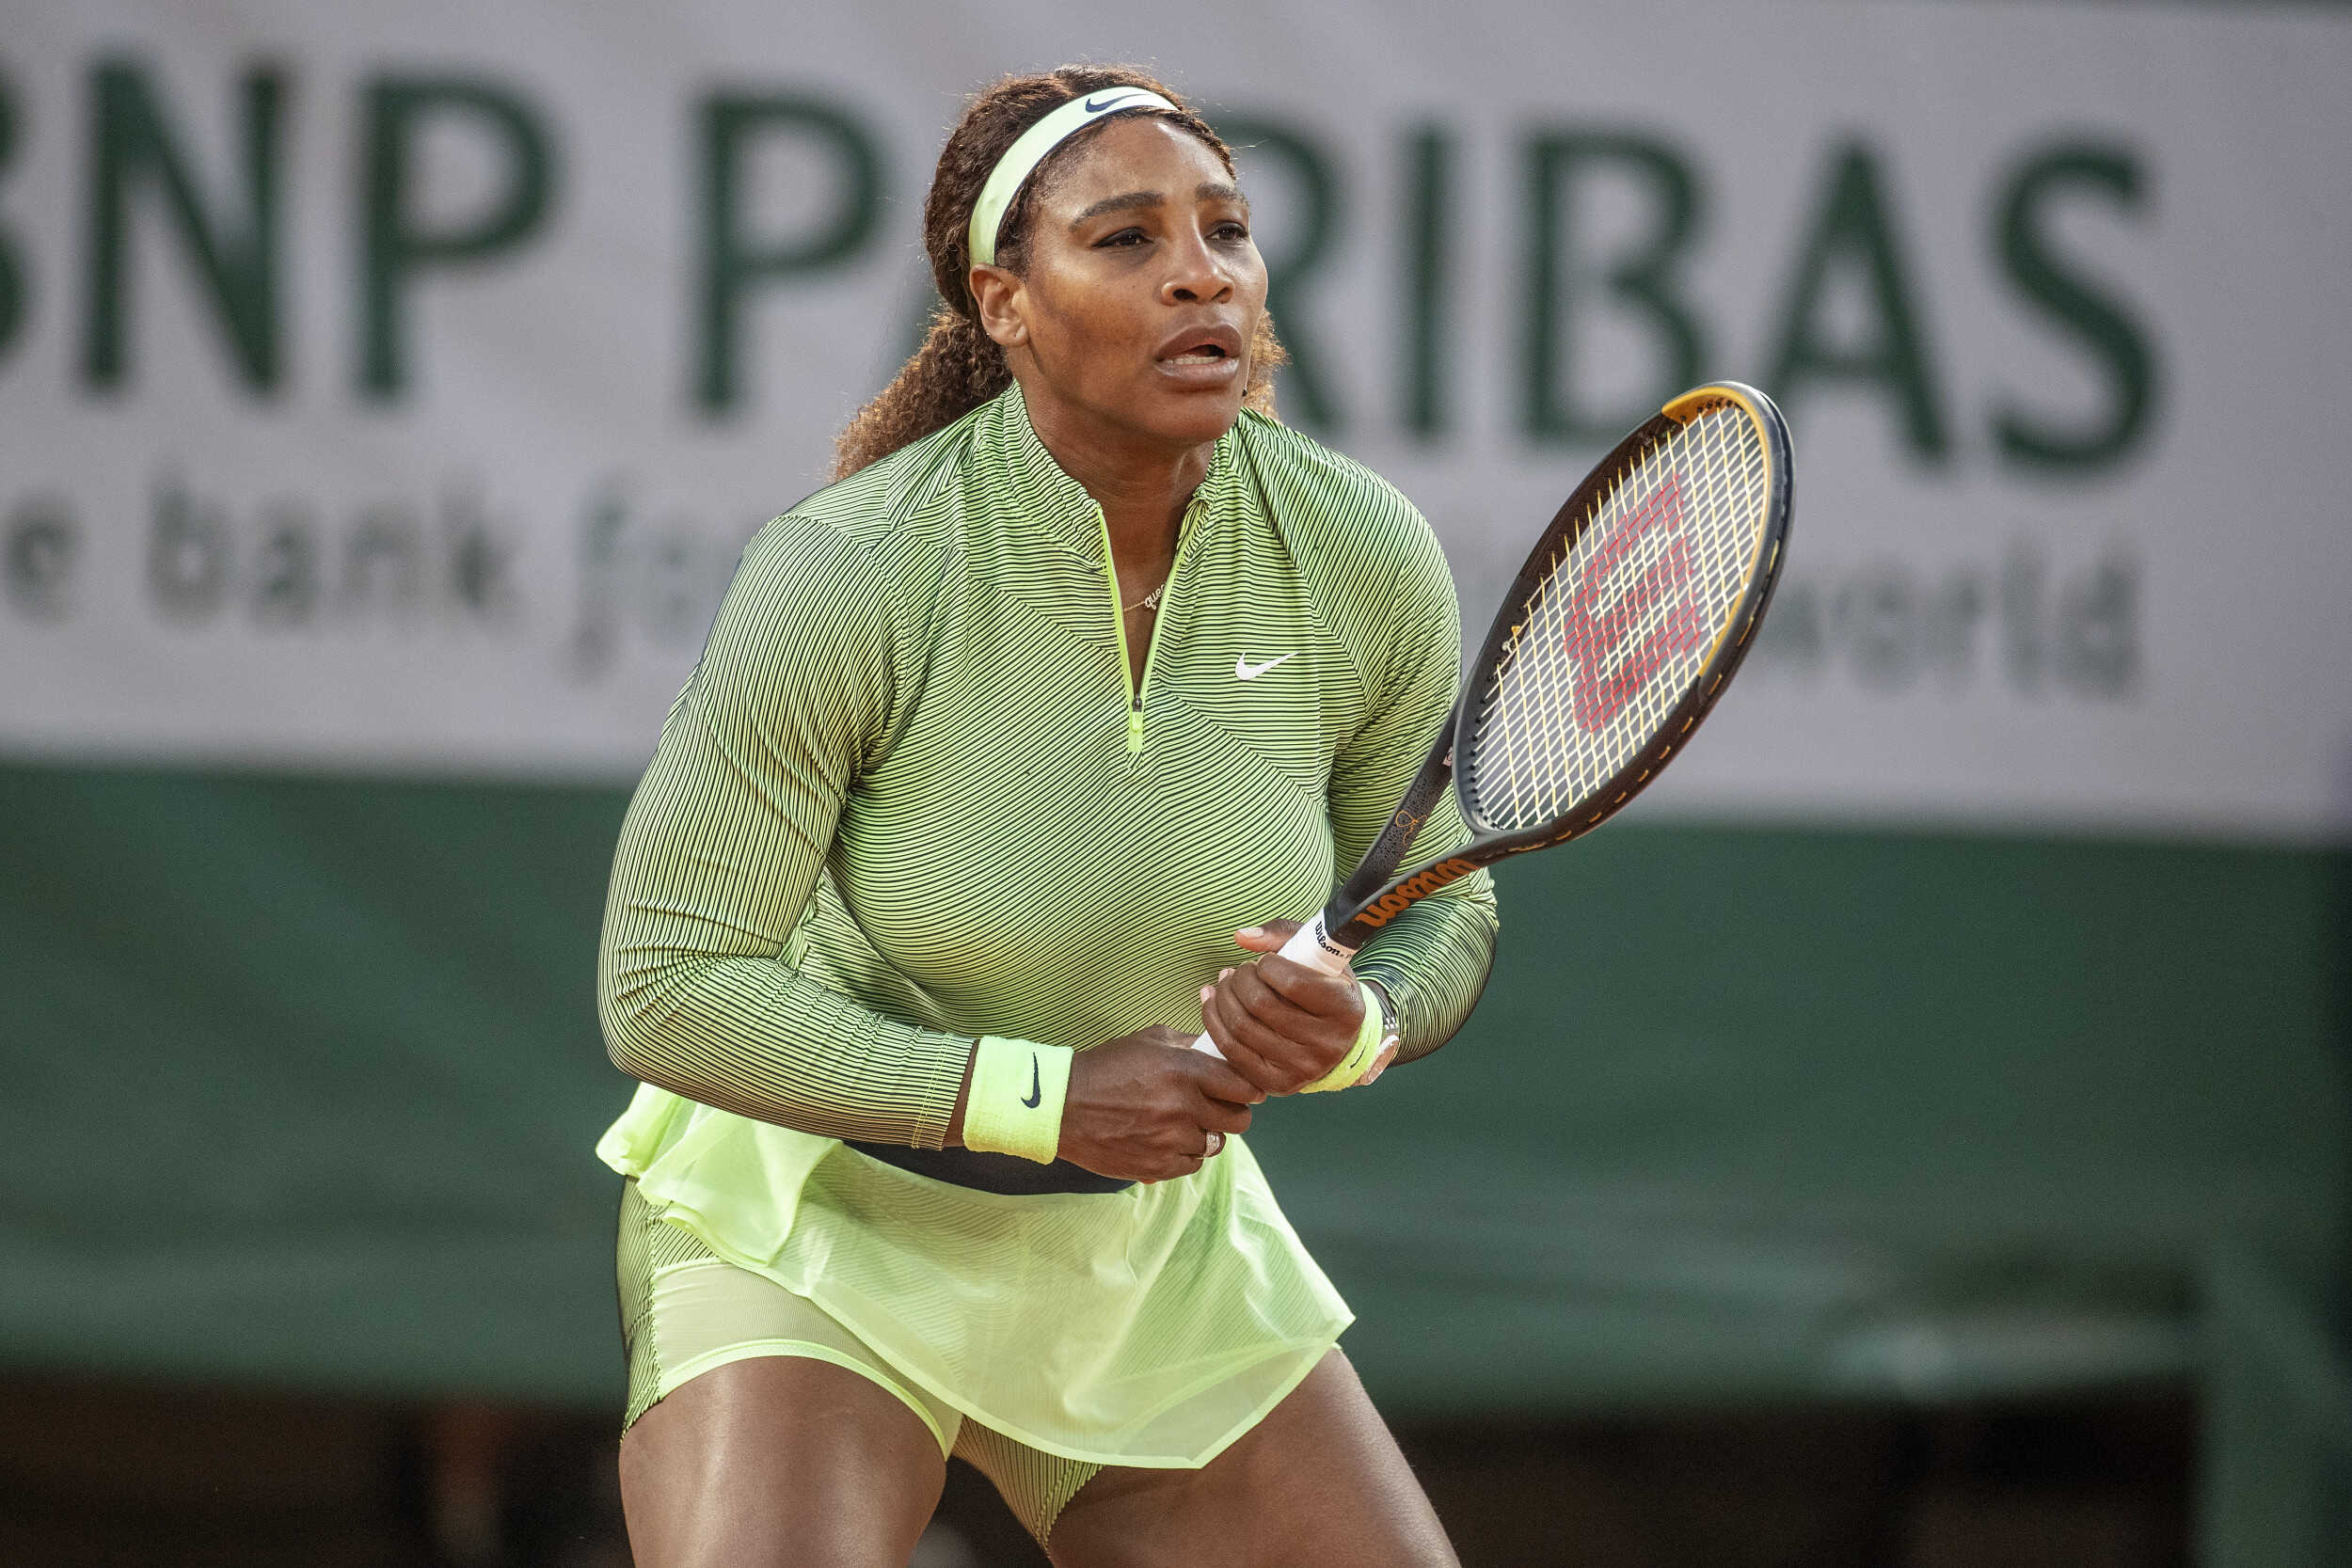 How To Watch Serena Williams